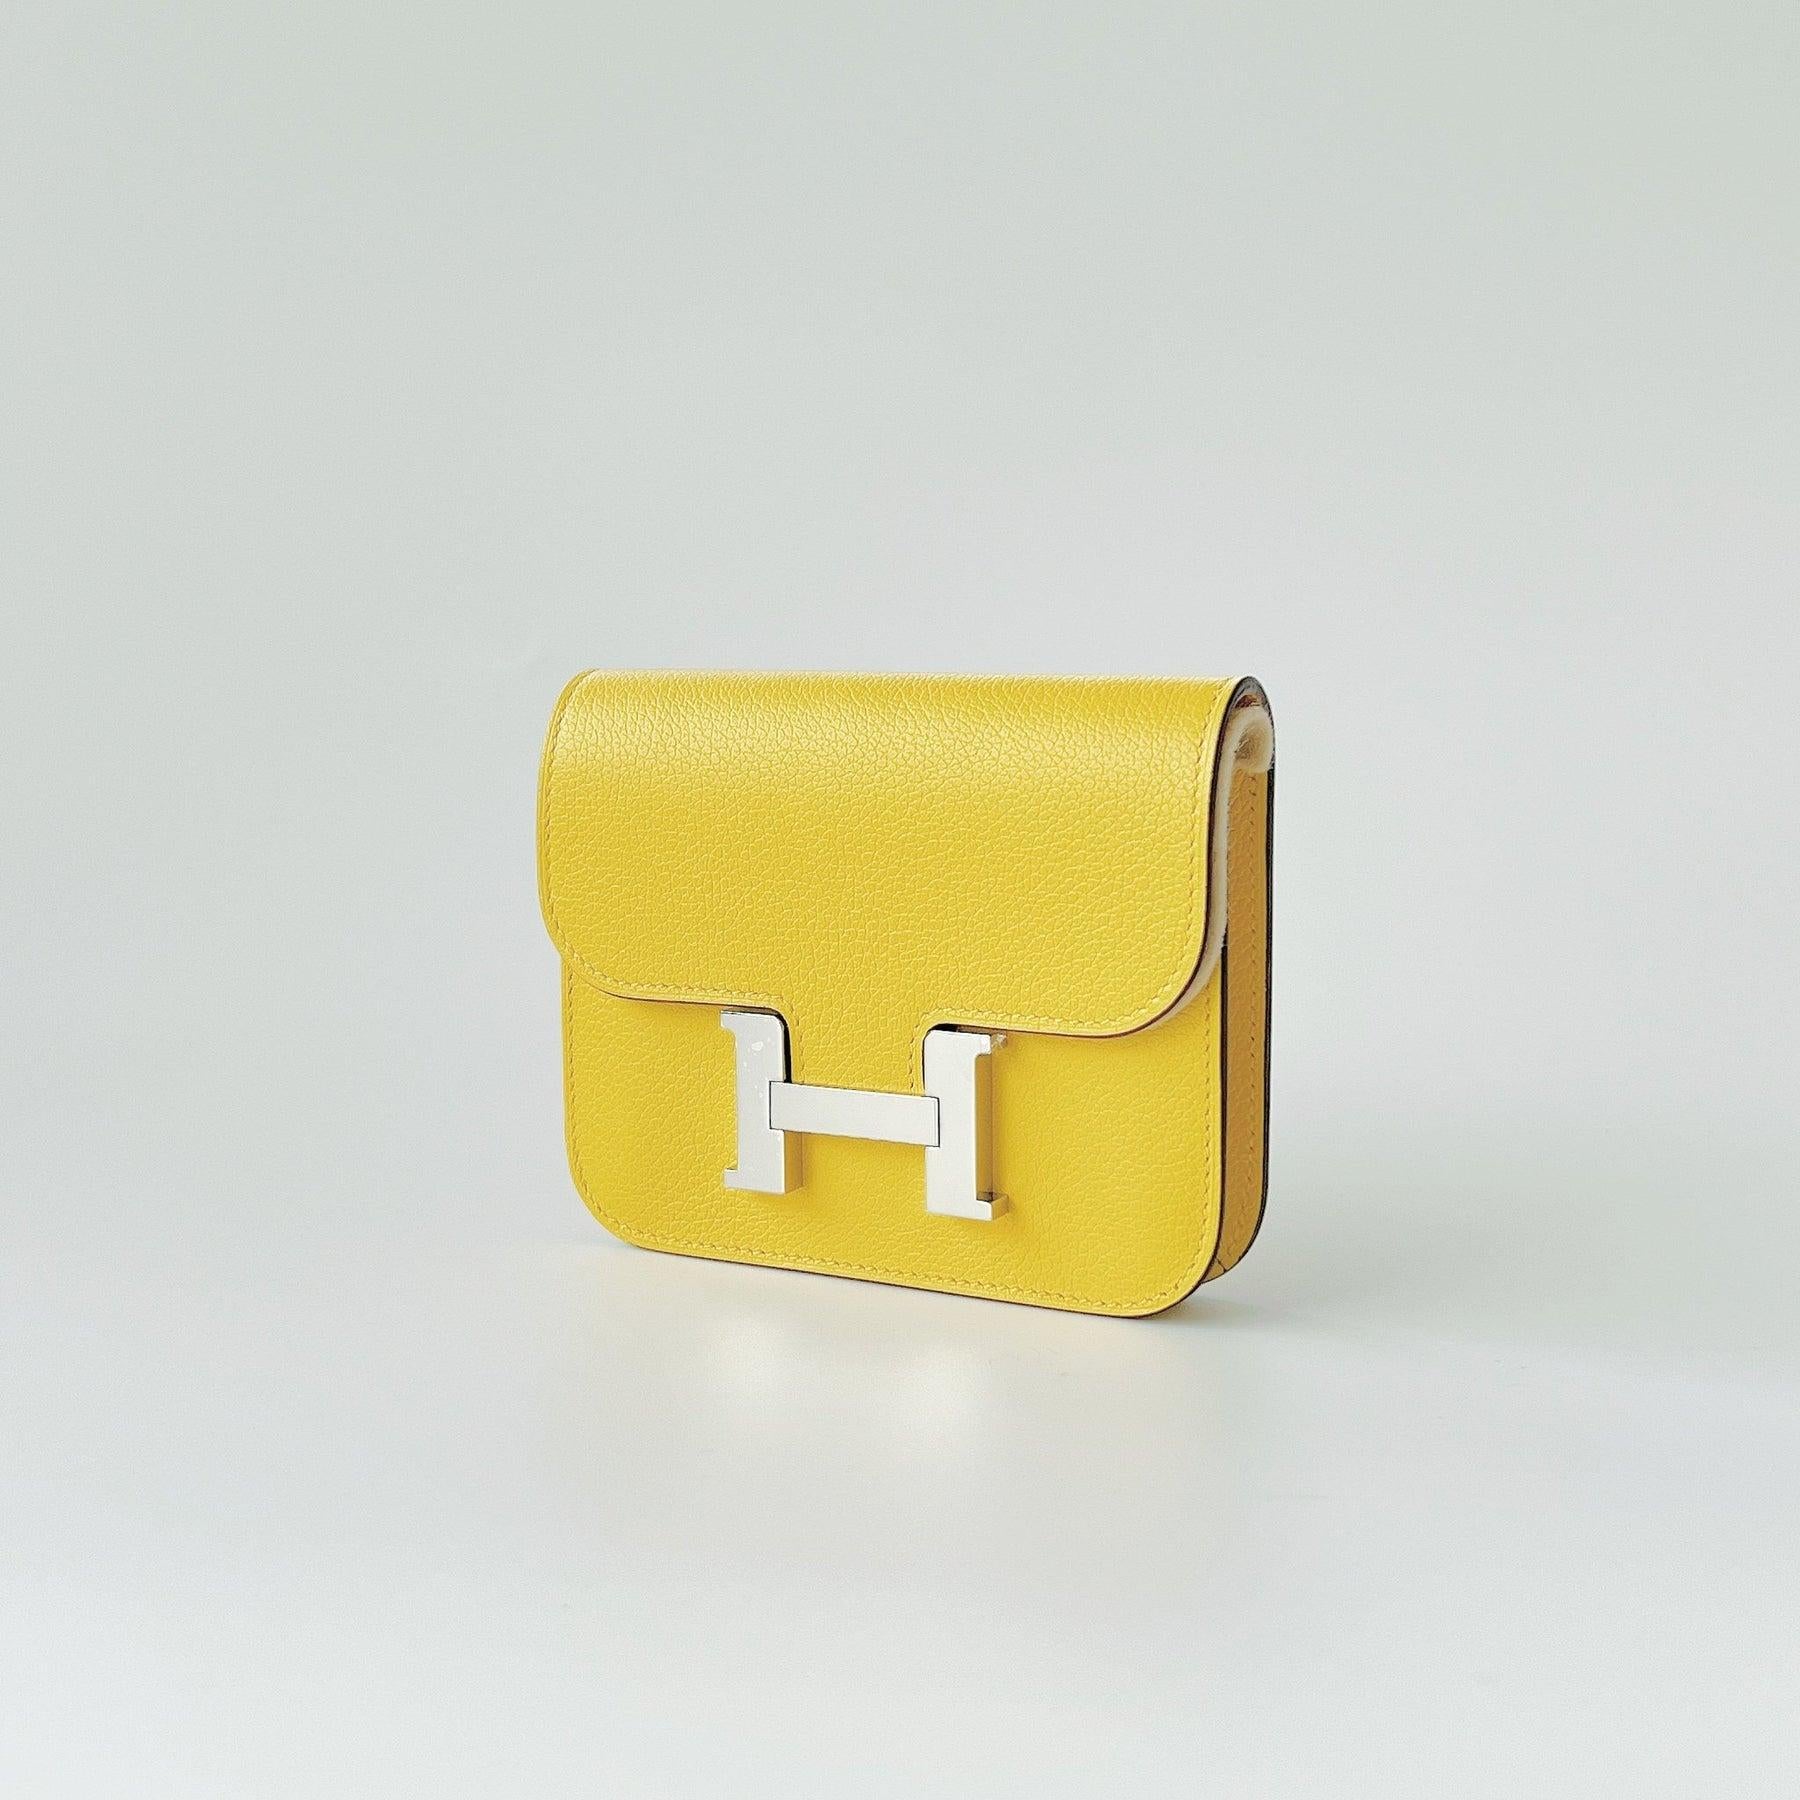 This beautiful Hermès Constance Slim Wallet is in Jeune De Naples (Yellow) with Silver plated hardware. Included is a removable wallet that can be used as a change purse. There is also 2 credit card slots. In the rear is a belt loop which can fit